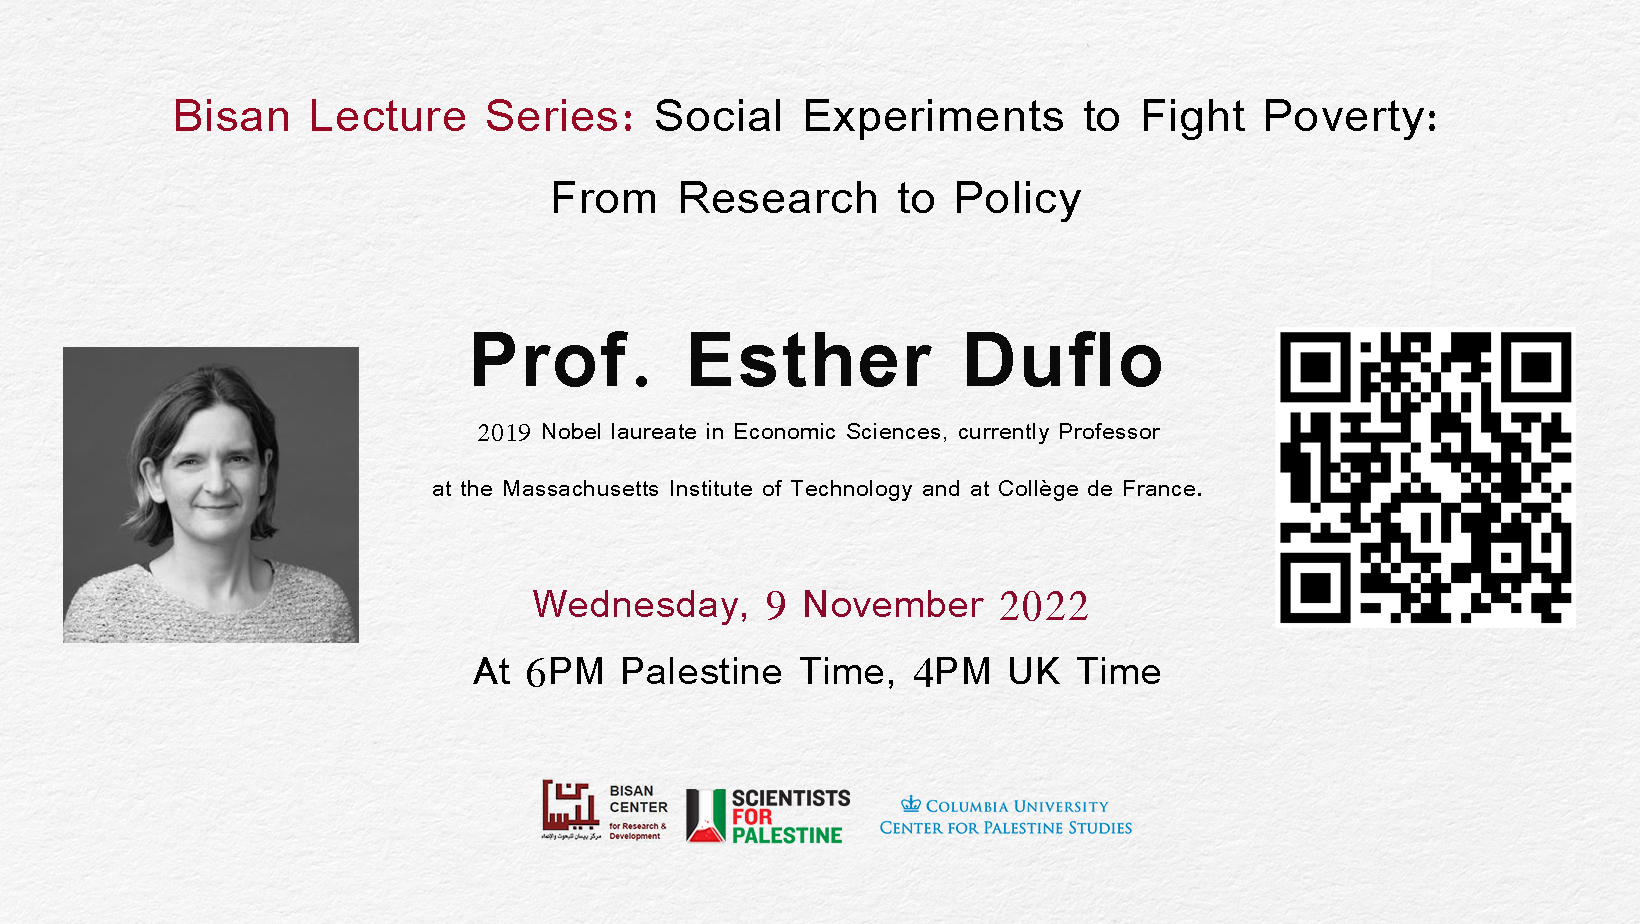 Social Experiments to Fight Poverty: From Research to Policy-Prof. Esther Duflo